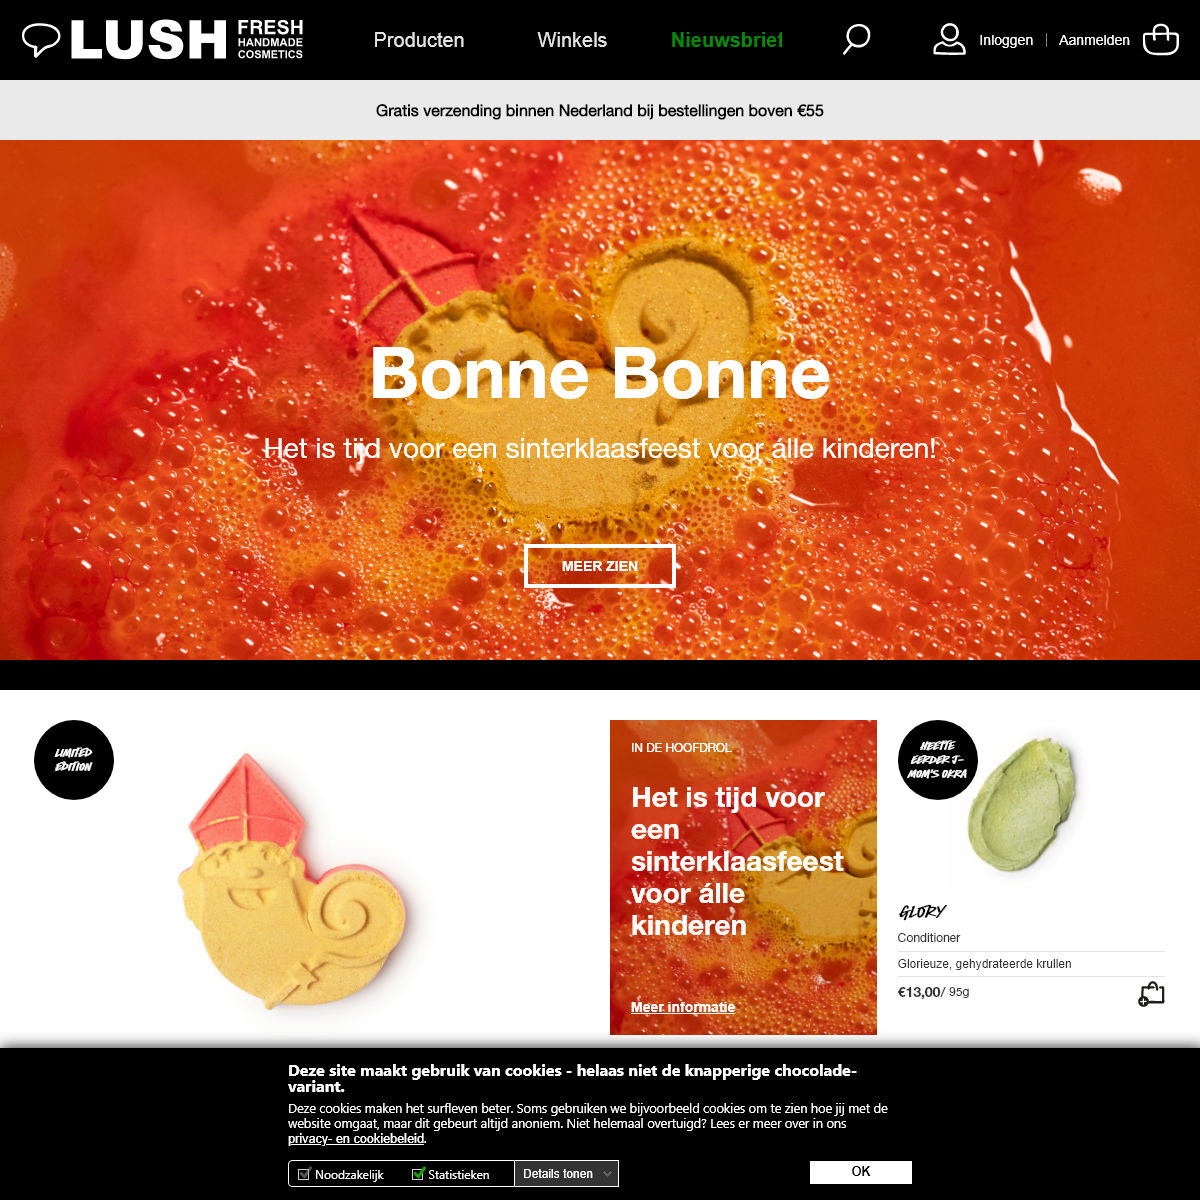 A complete backup of lush.nl